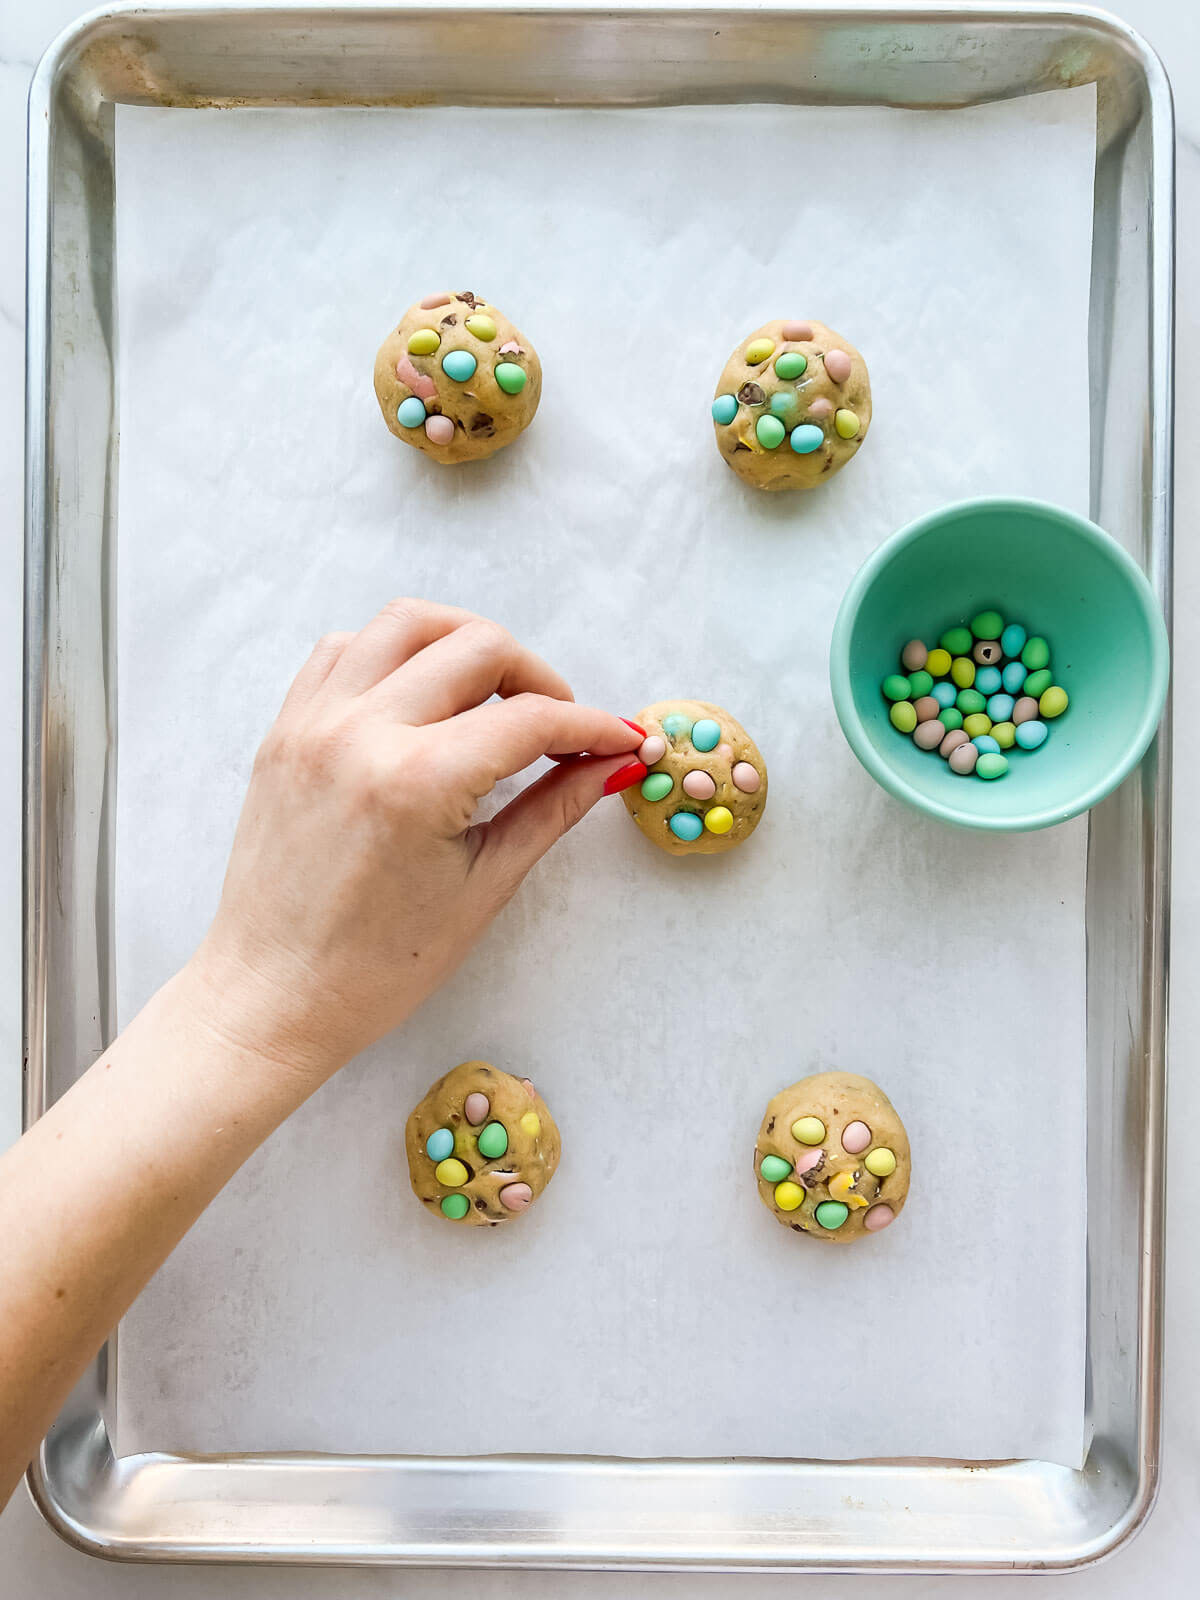 Garnishing chocolate chip cookies with colourful Cadbury Micro Eggs (which are a tiny version of candy-coated Mini Eggs)